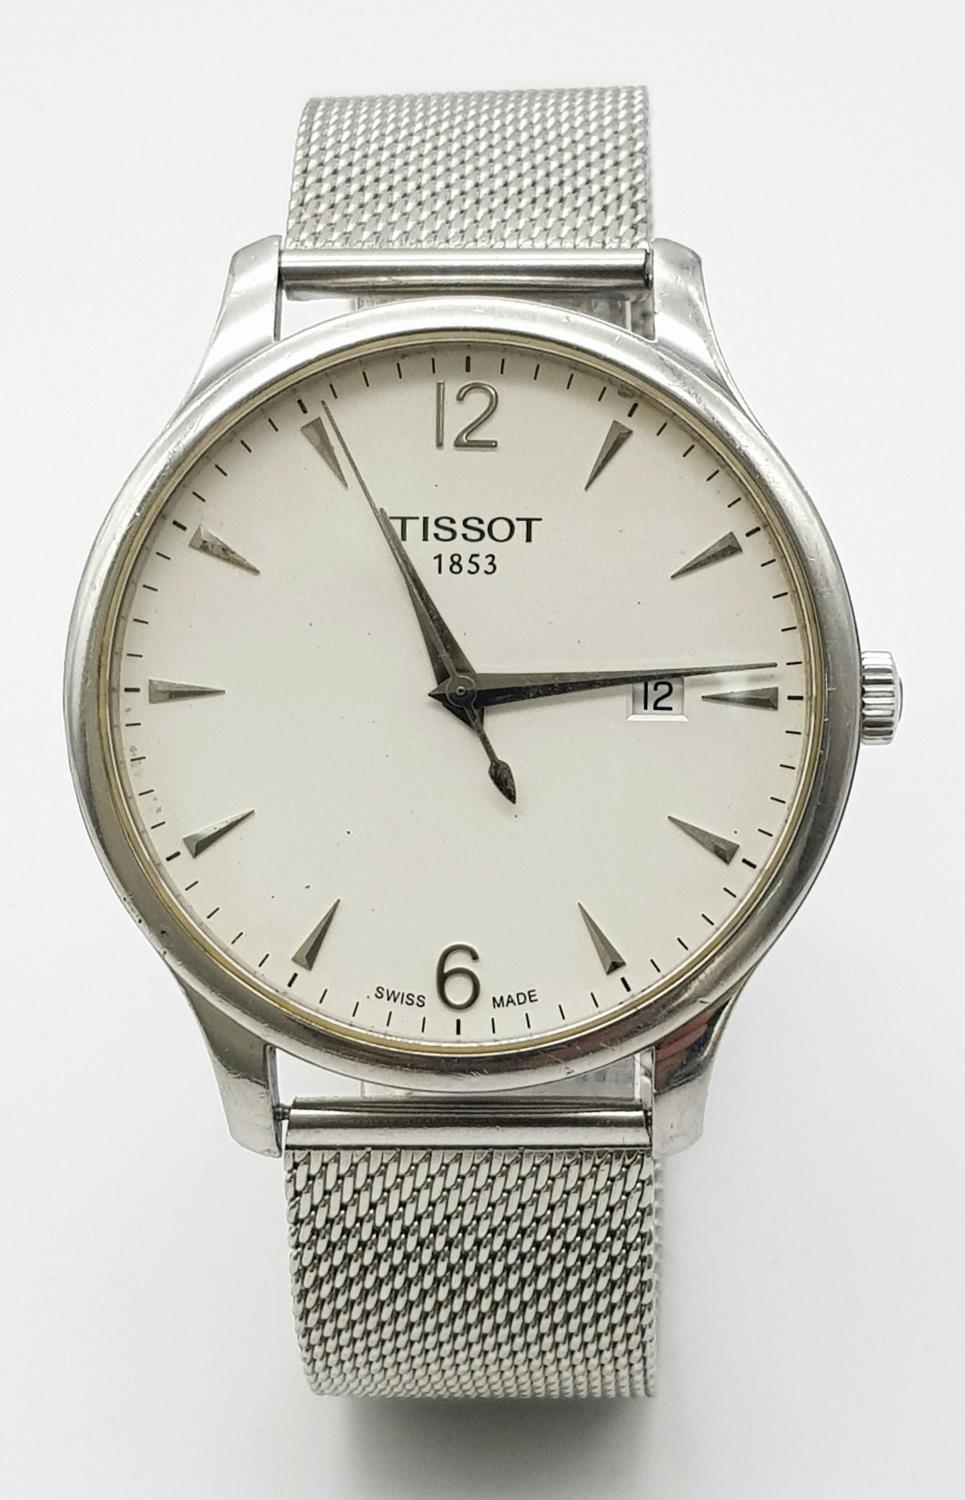 A Large Tissot Quartz Gents Watch. Stainless steel bracelet and case - 42mm. White dial with date - Image 2 of 6